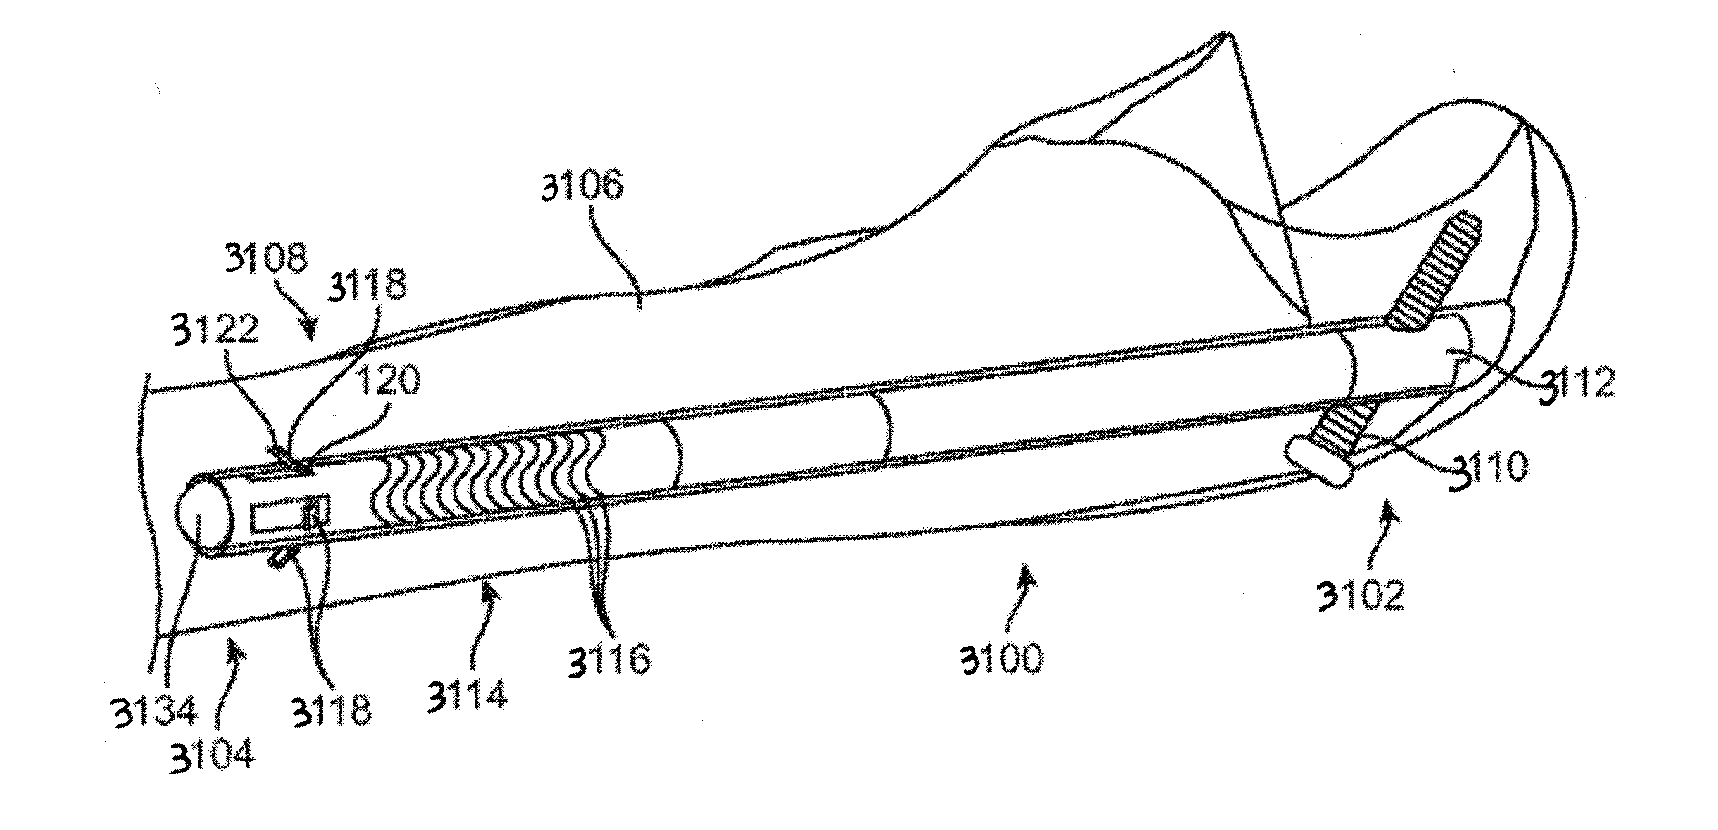 Straight intramedullary fracture fixation devices and methods